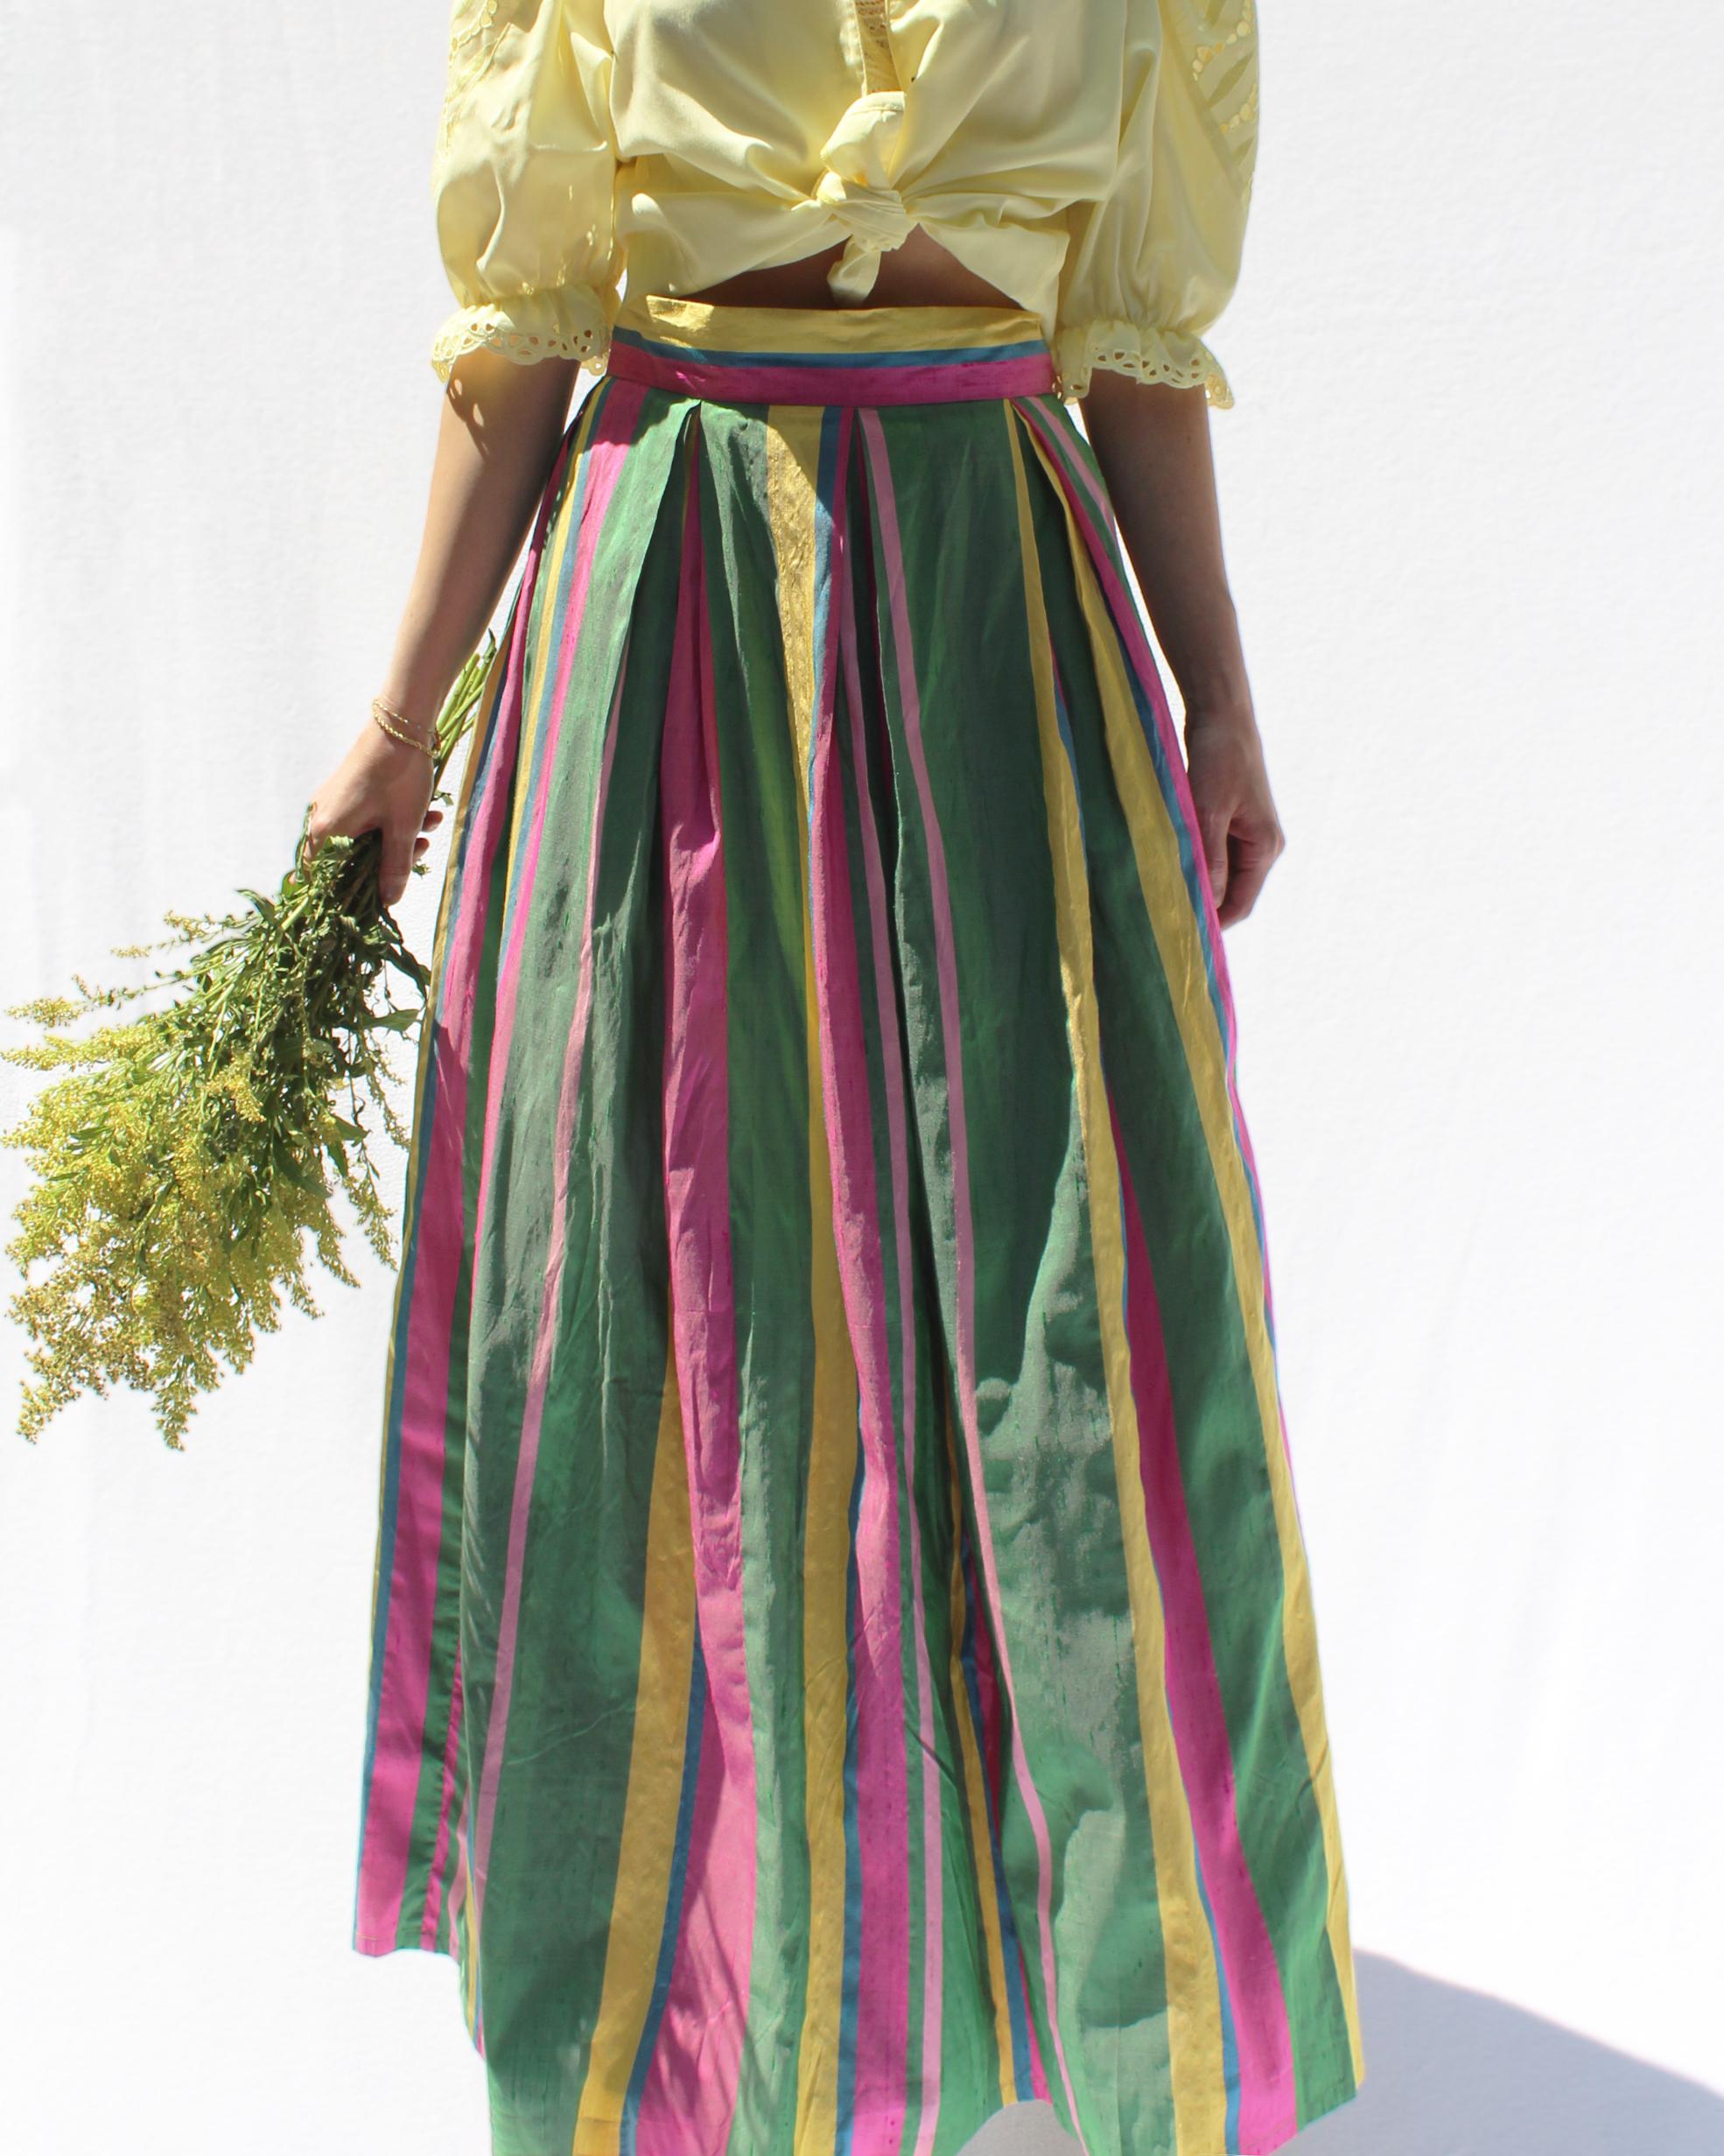 I absolutely love the colors of this vintage Lilly Pulitzer full ballskirt, and the silk dupioni fabric intensifies the vibrant hues of the stripes. It's lined from the waist to the hips, and then there is a yellow tulle petticoat lining which